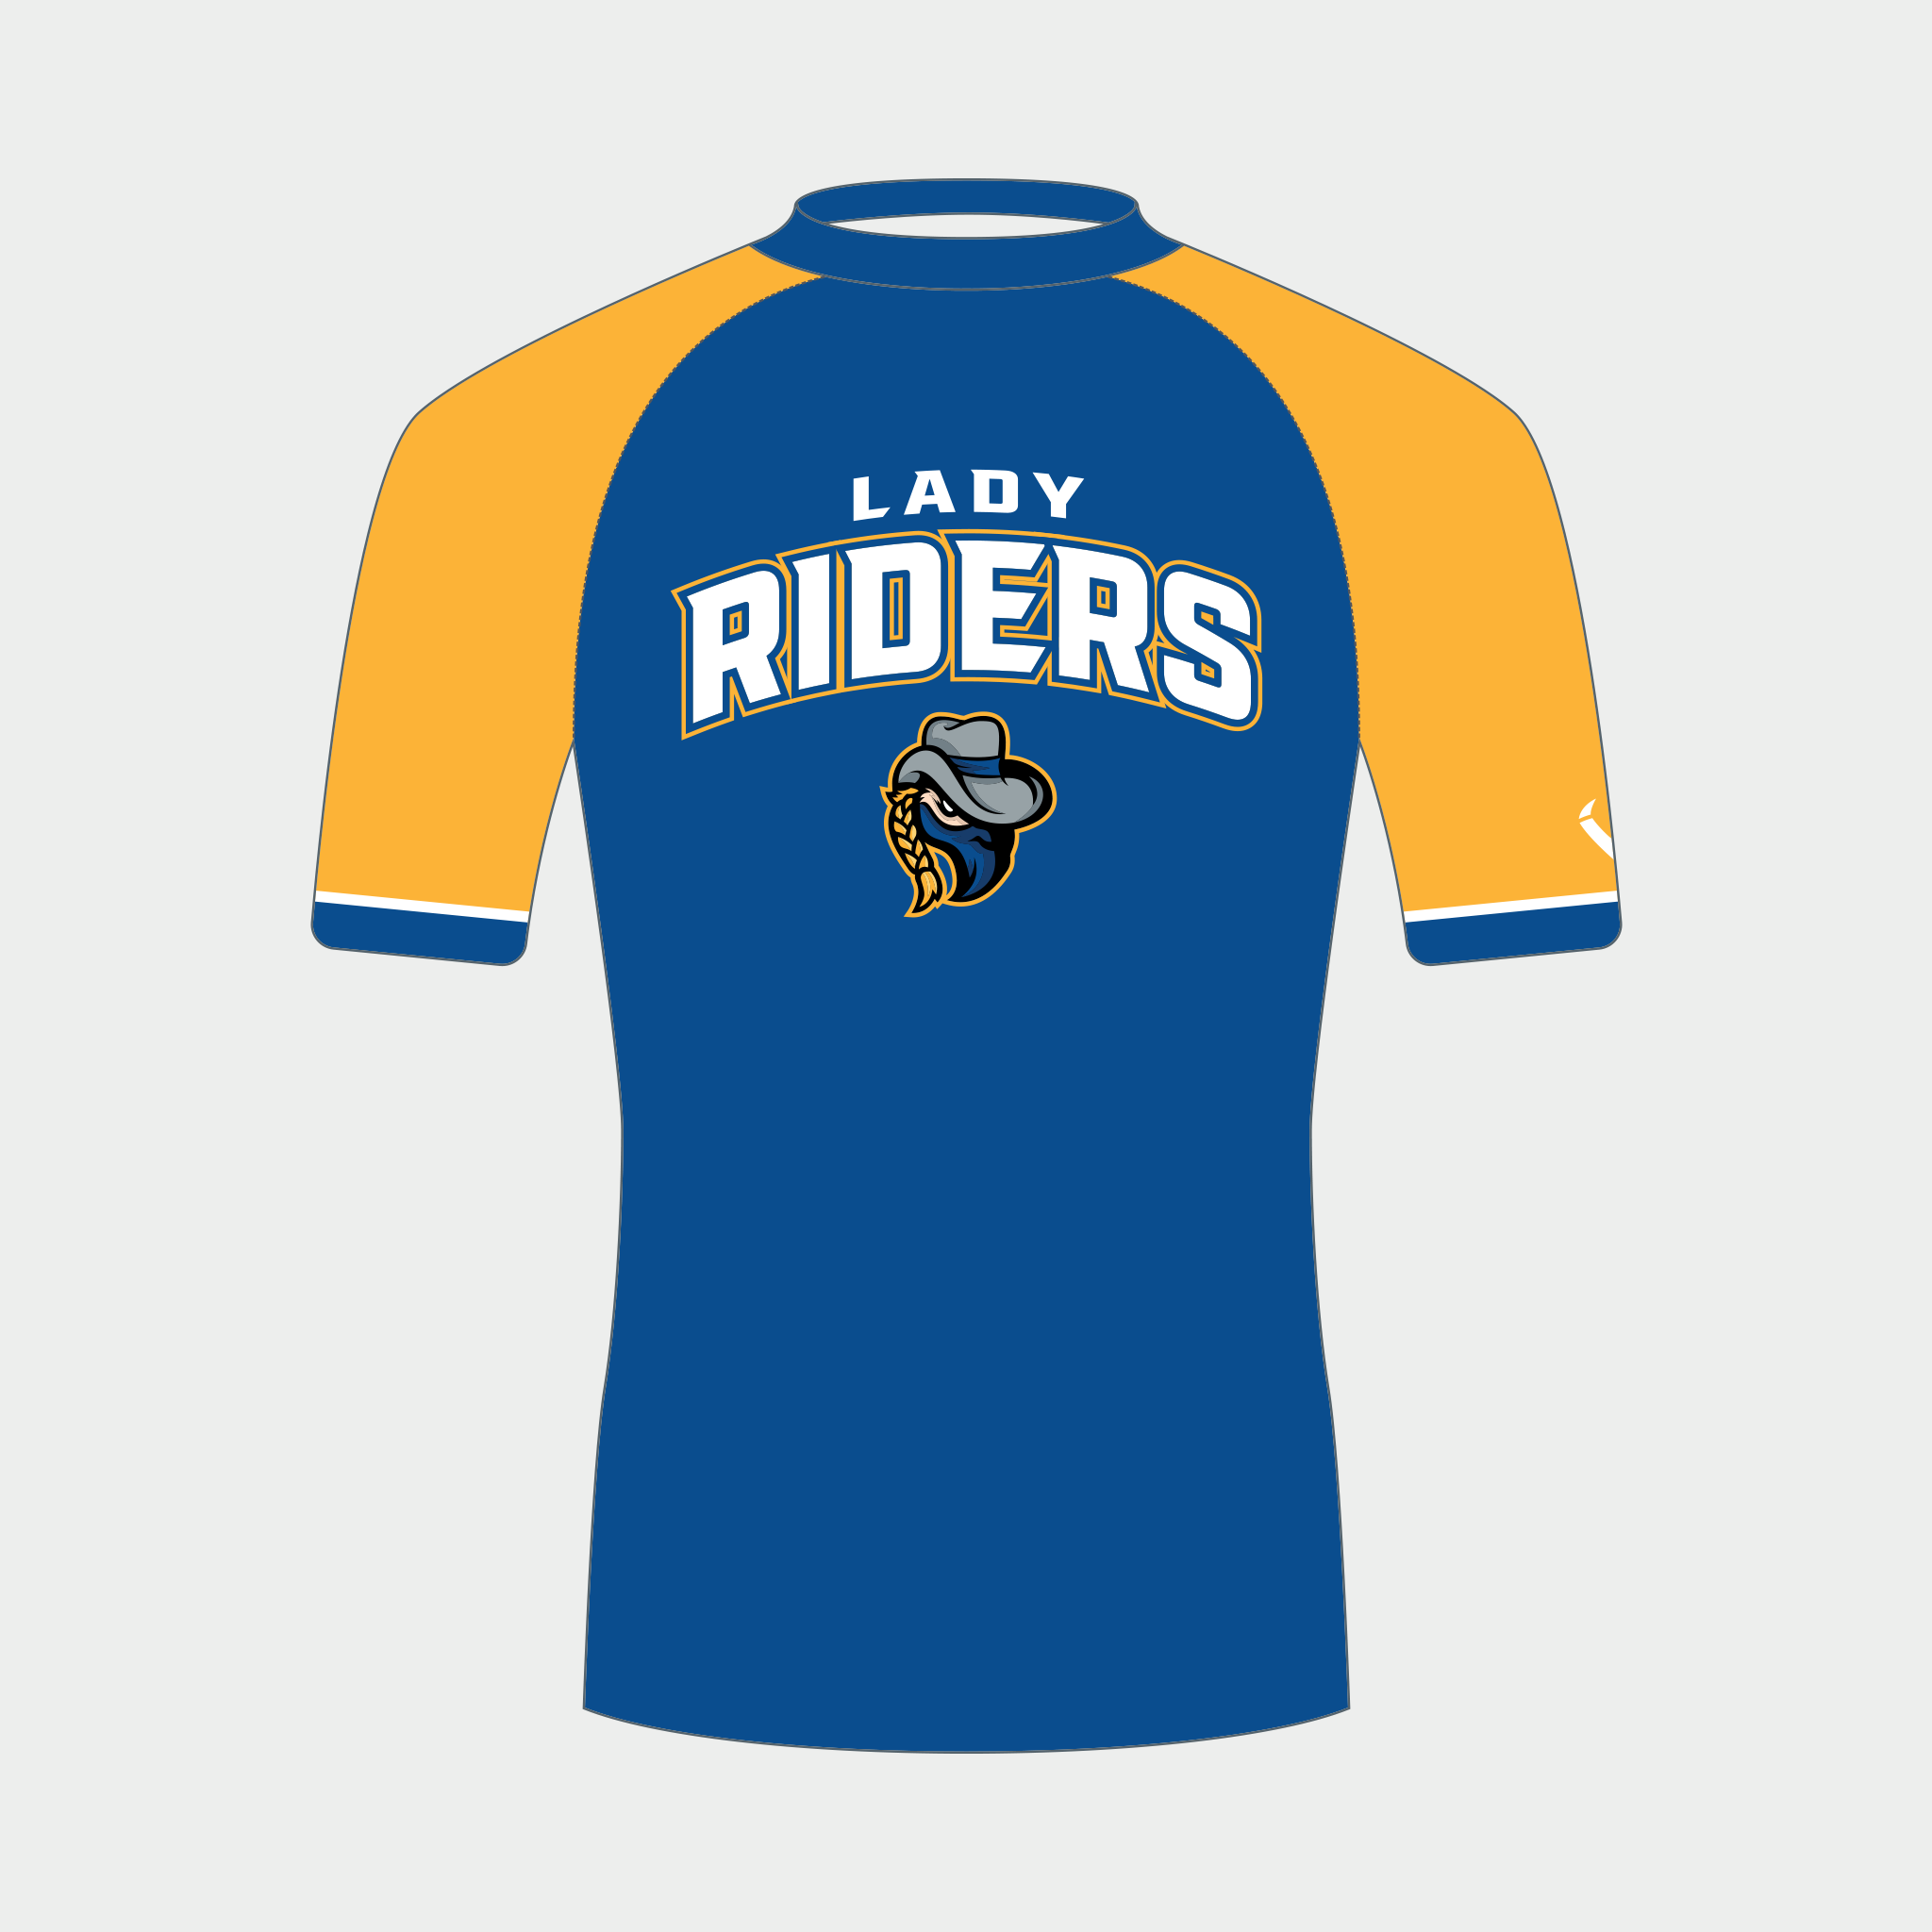 Lady Riders - Compression Top